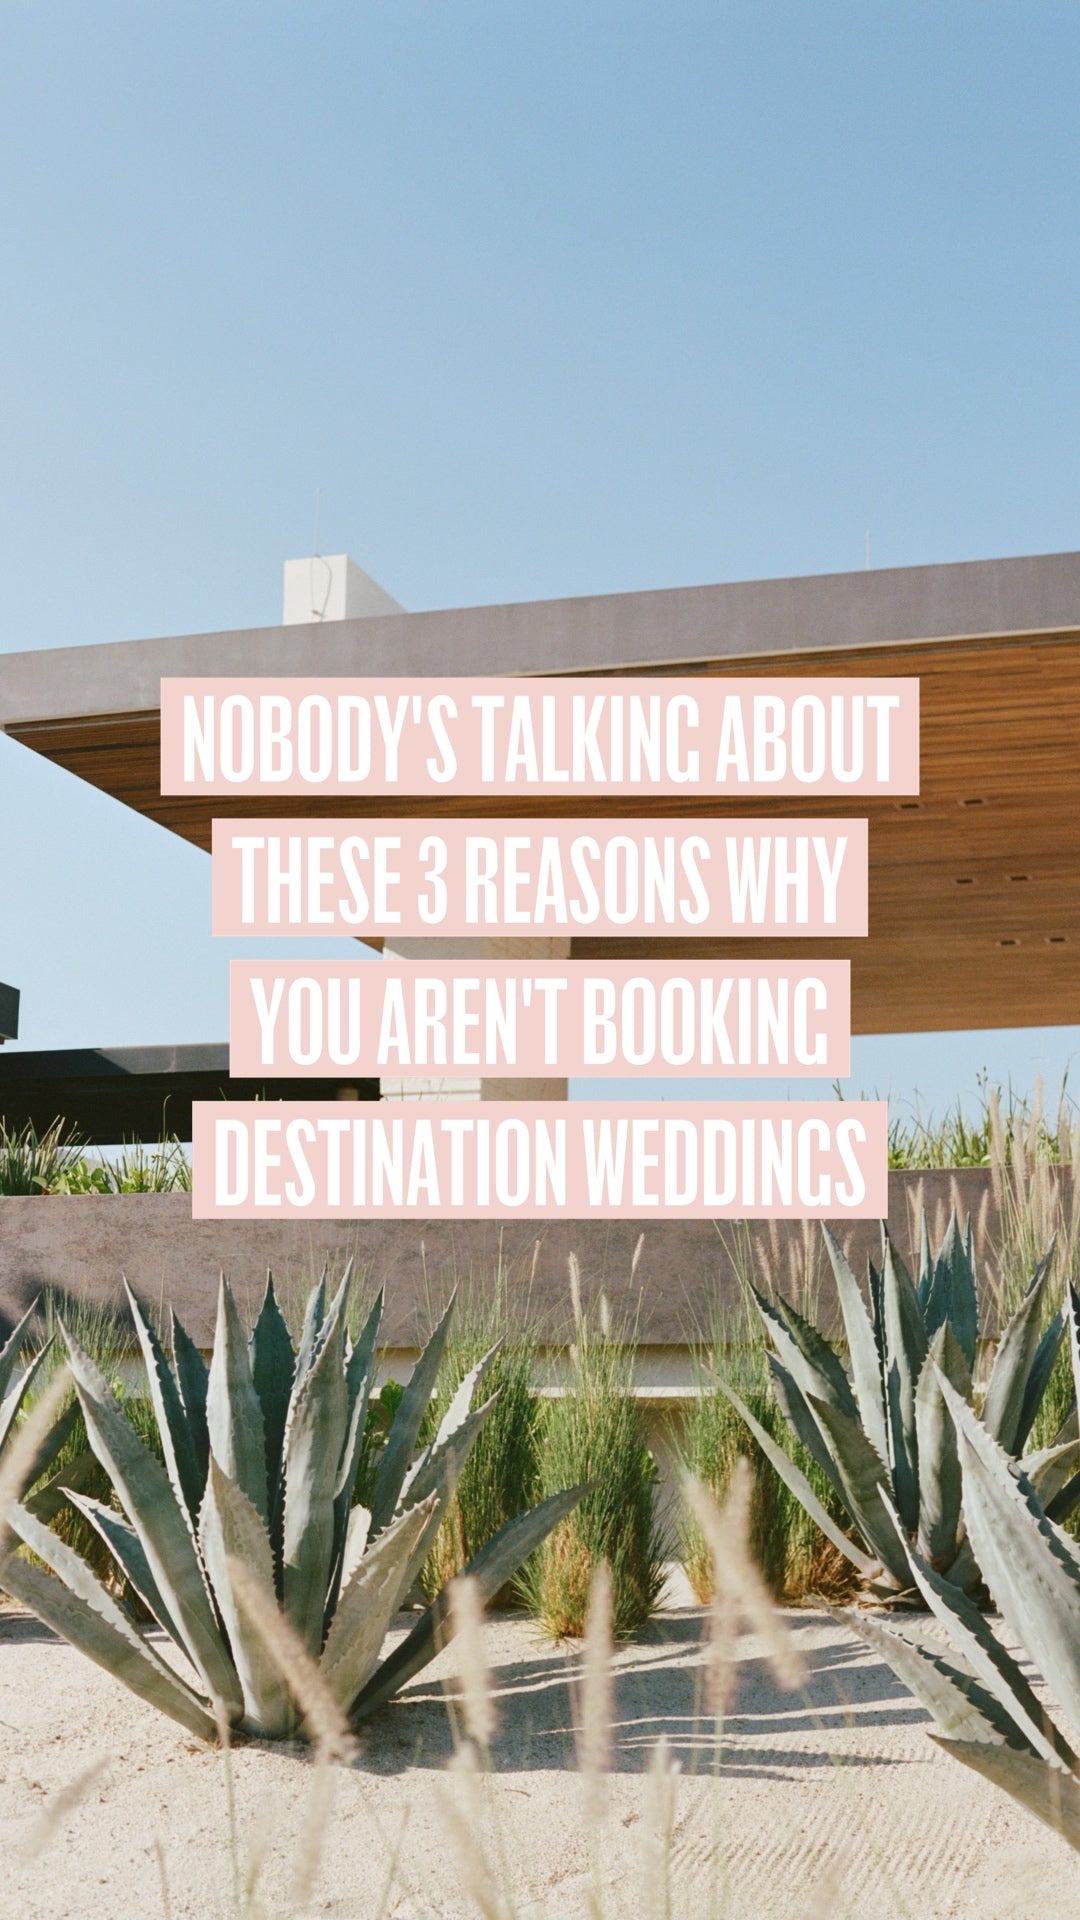 The 3 Reasons You're Not Booking Destination Weddings